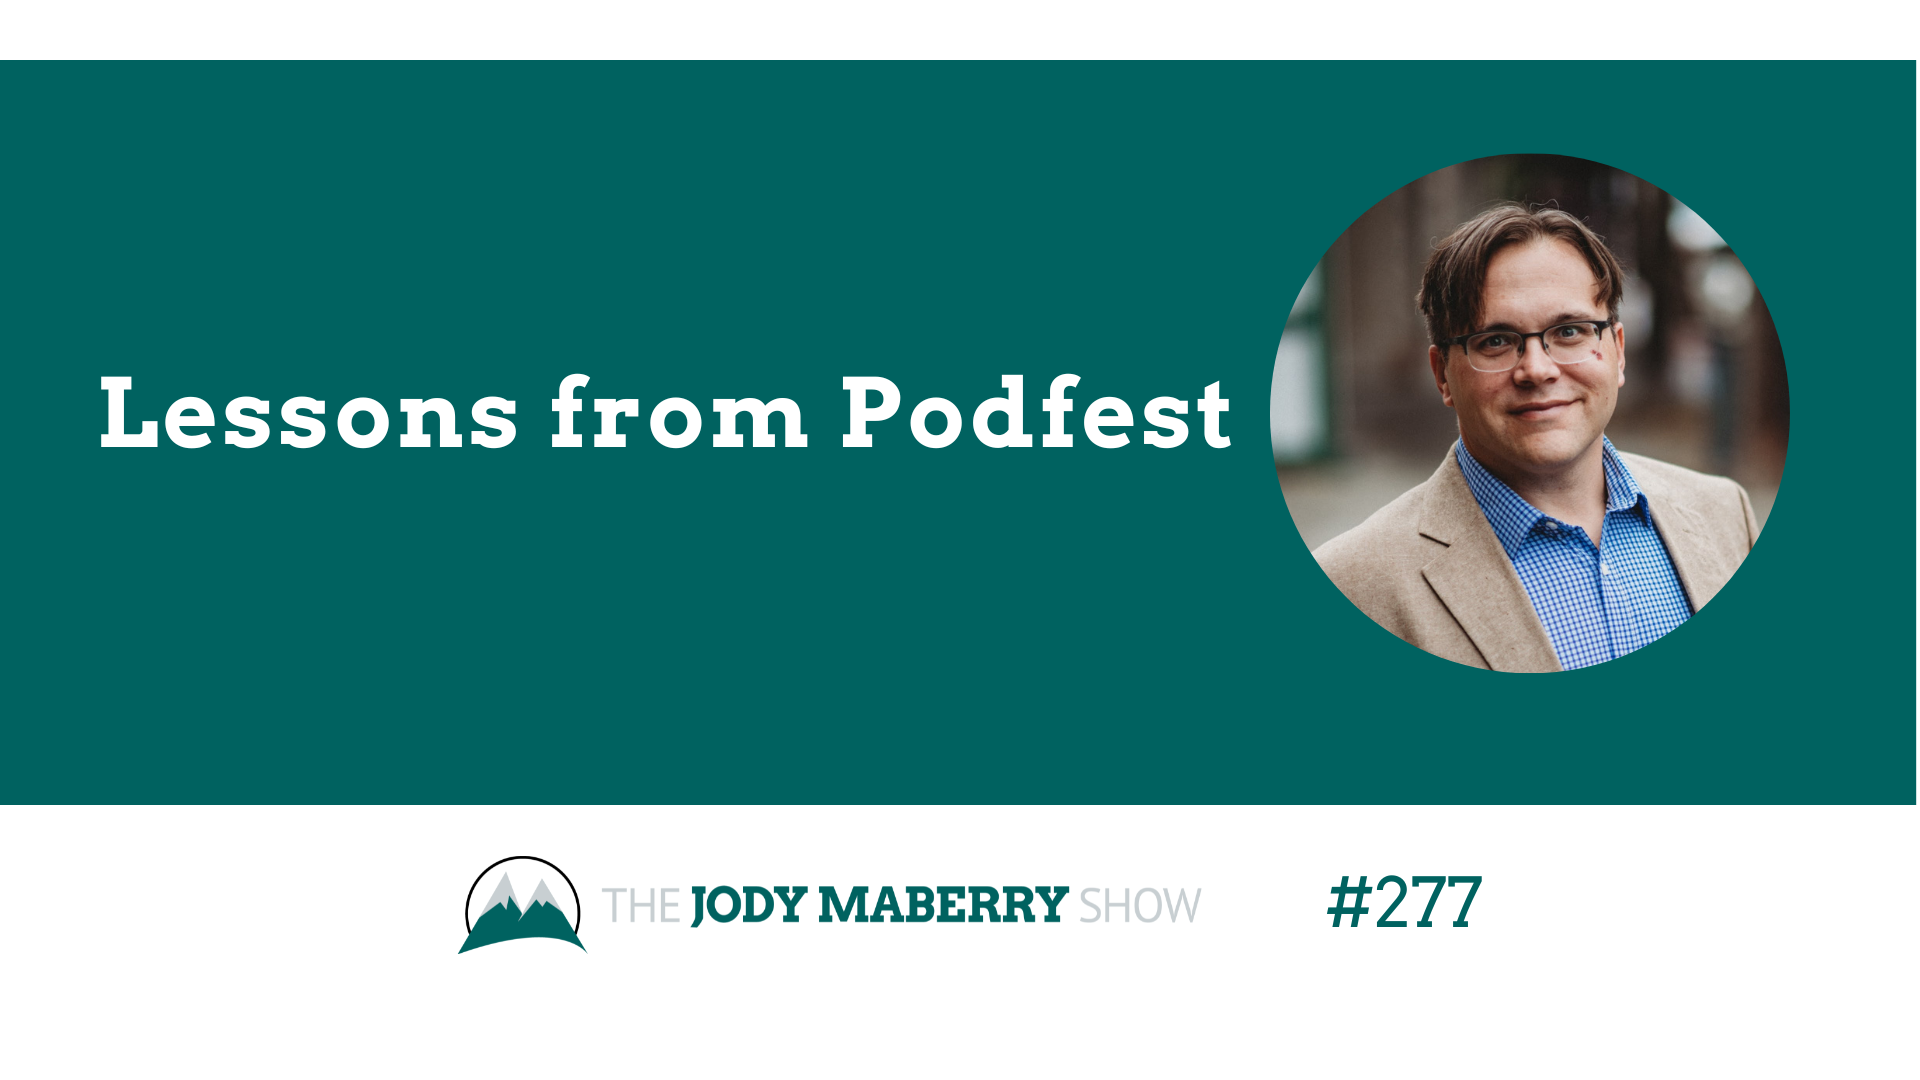 Jody Maberry Show Episode 277 Lessons from Podfest